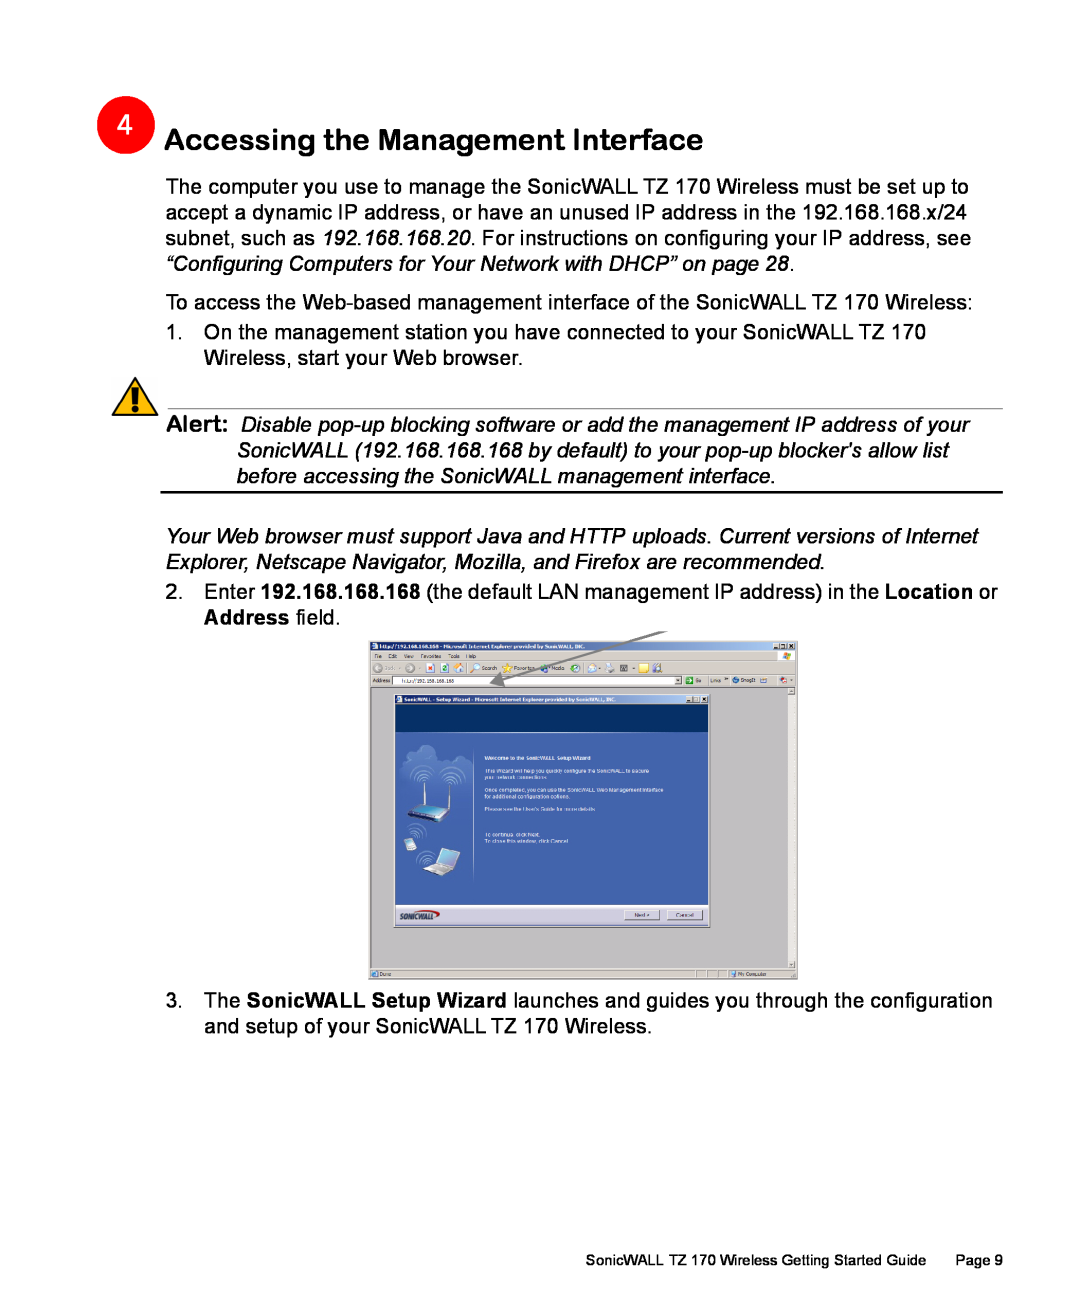 SonicWALL 170 manual Accessing the Management Interface 